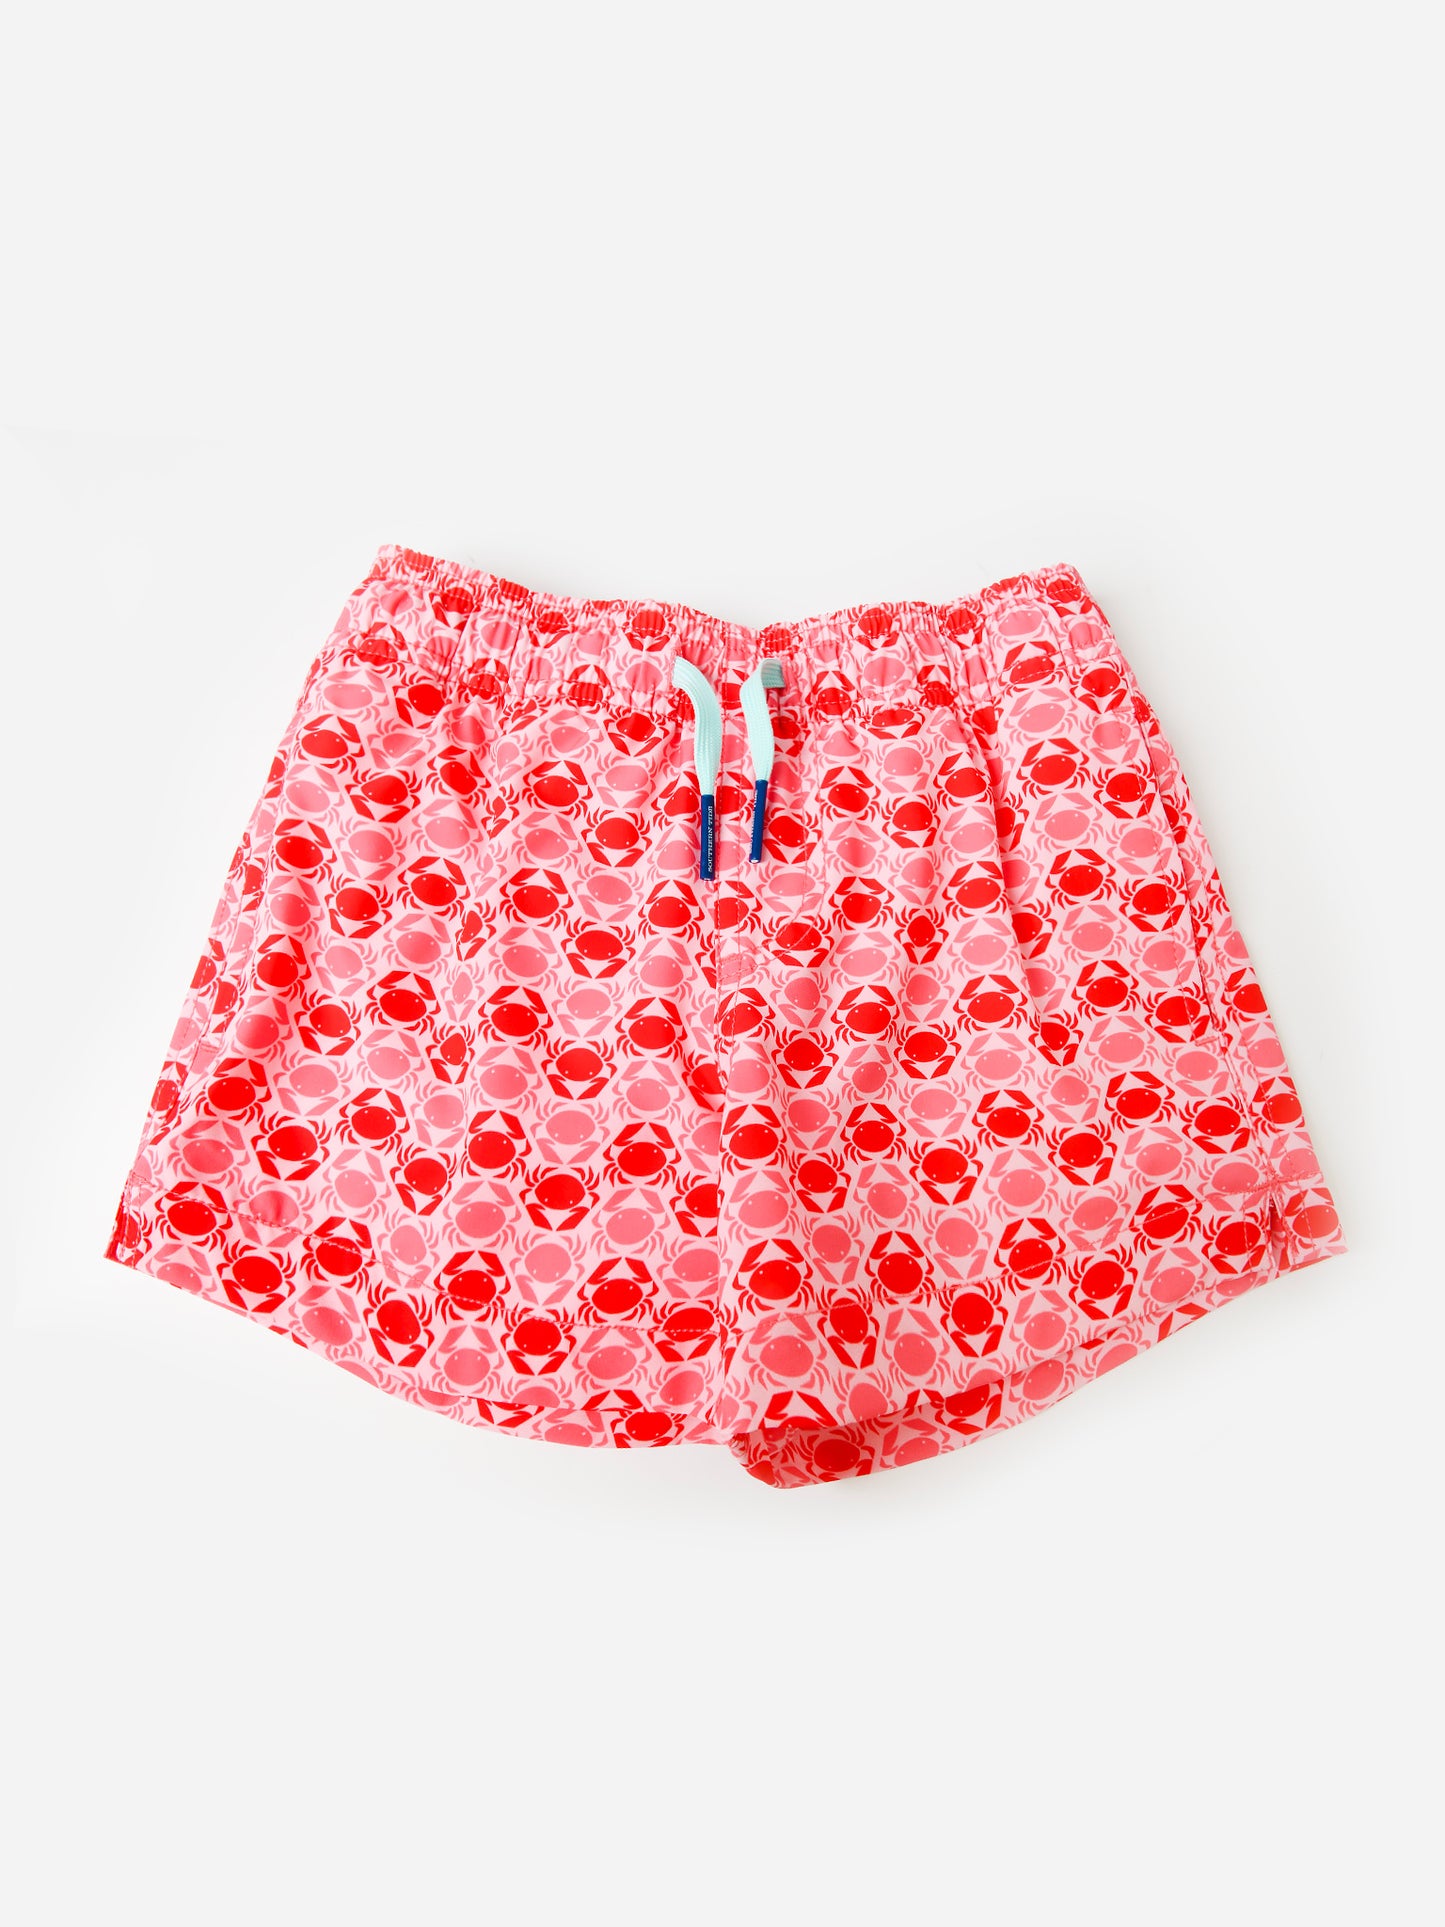 Southern Tide Boys' Why So Crabby Printed Swim Trunk